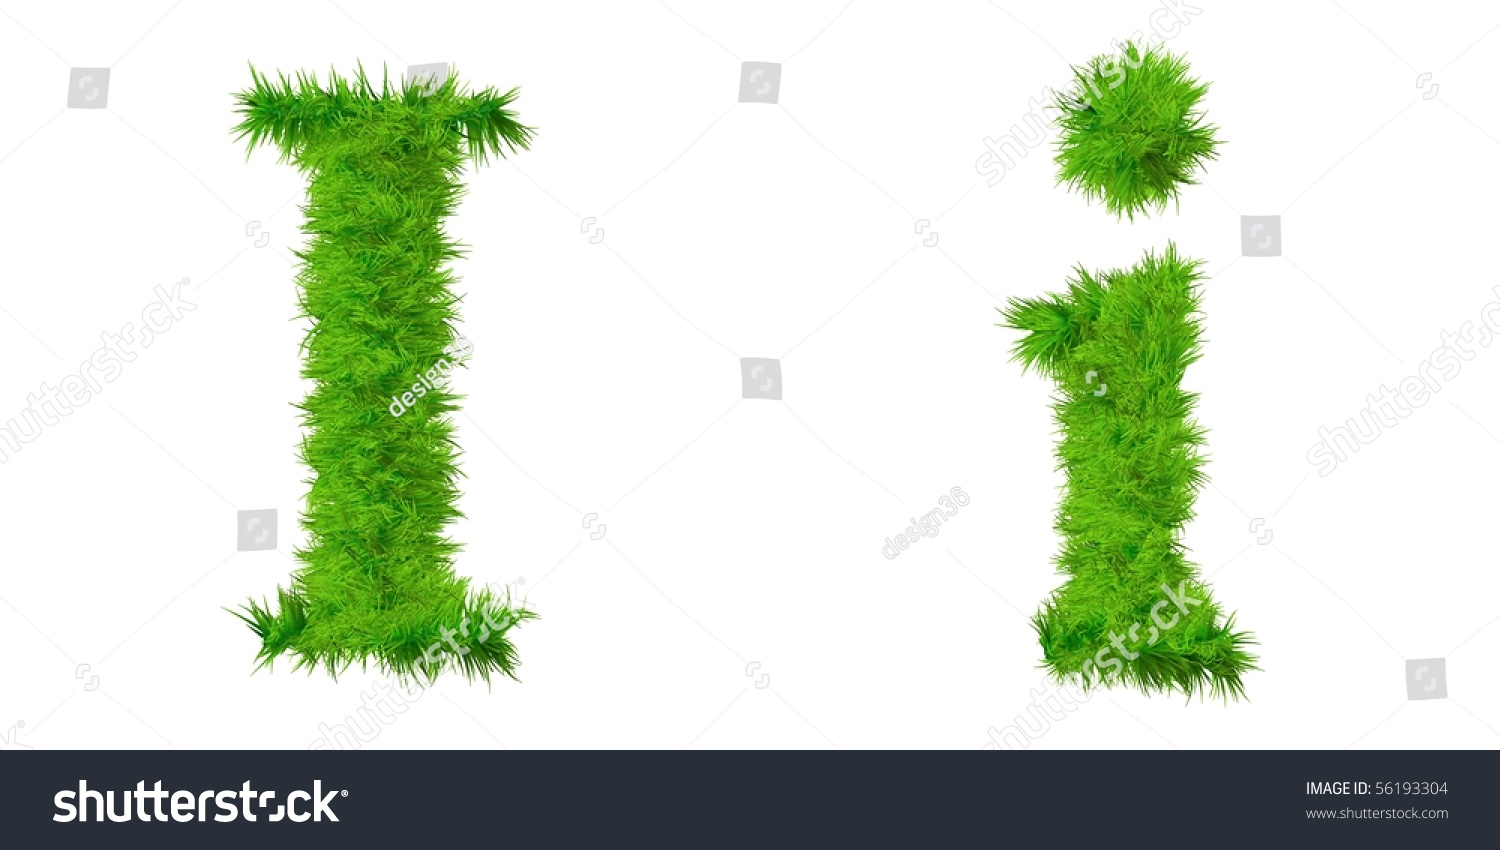 High Resolution Grass Font Isolated On White Background Stock Photo ...